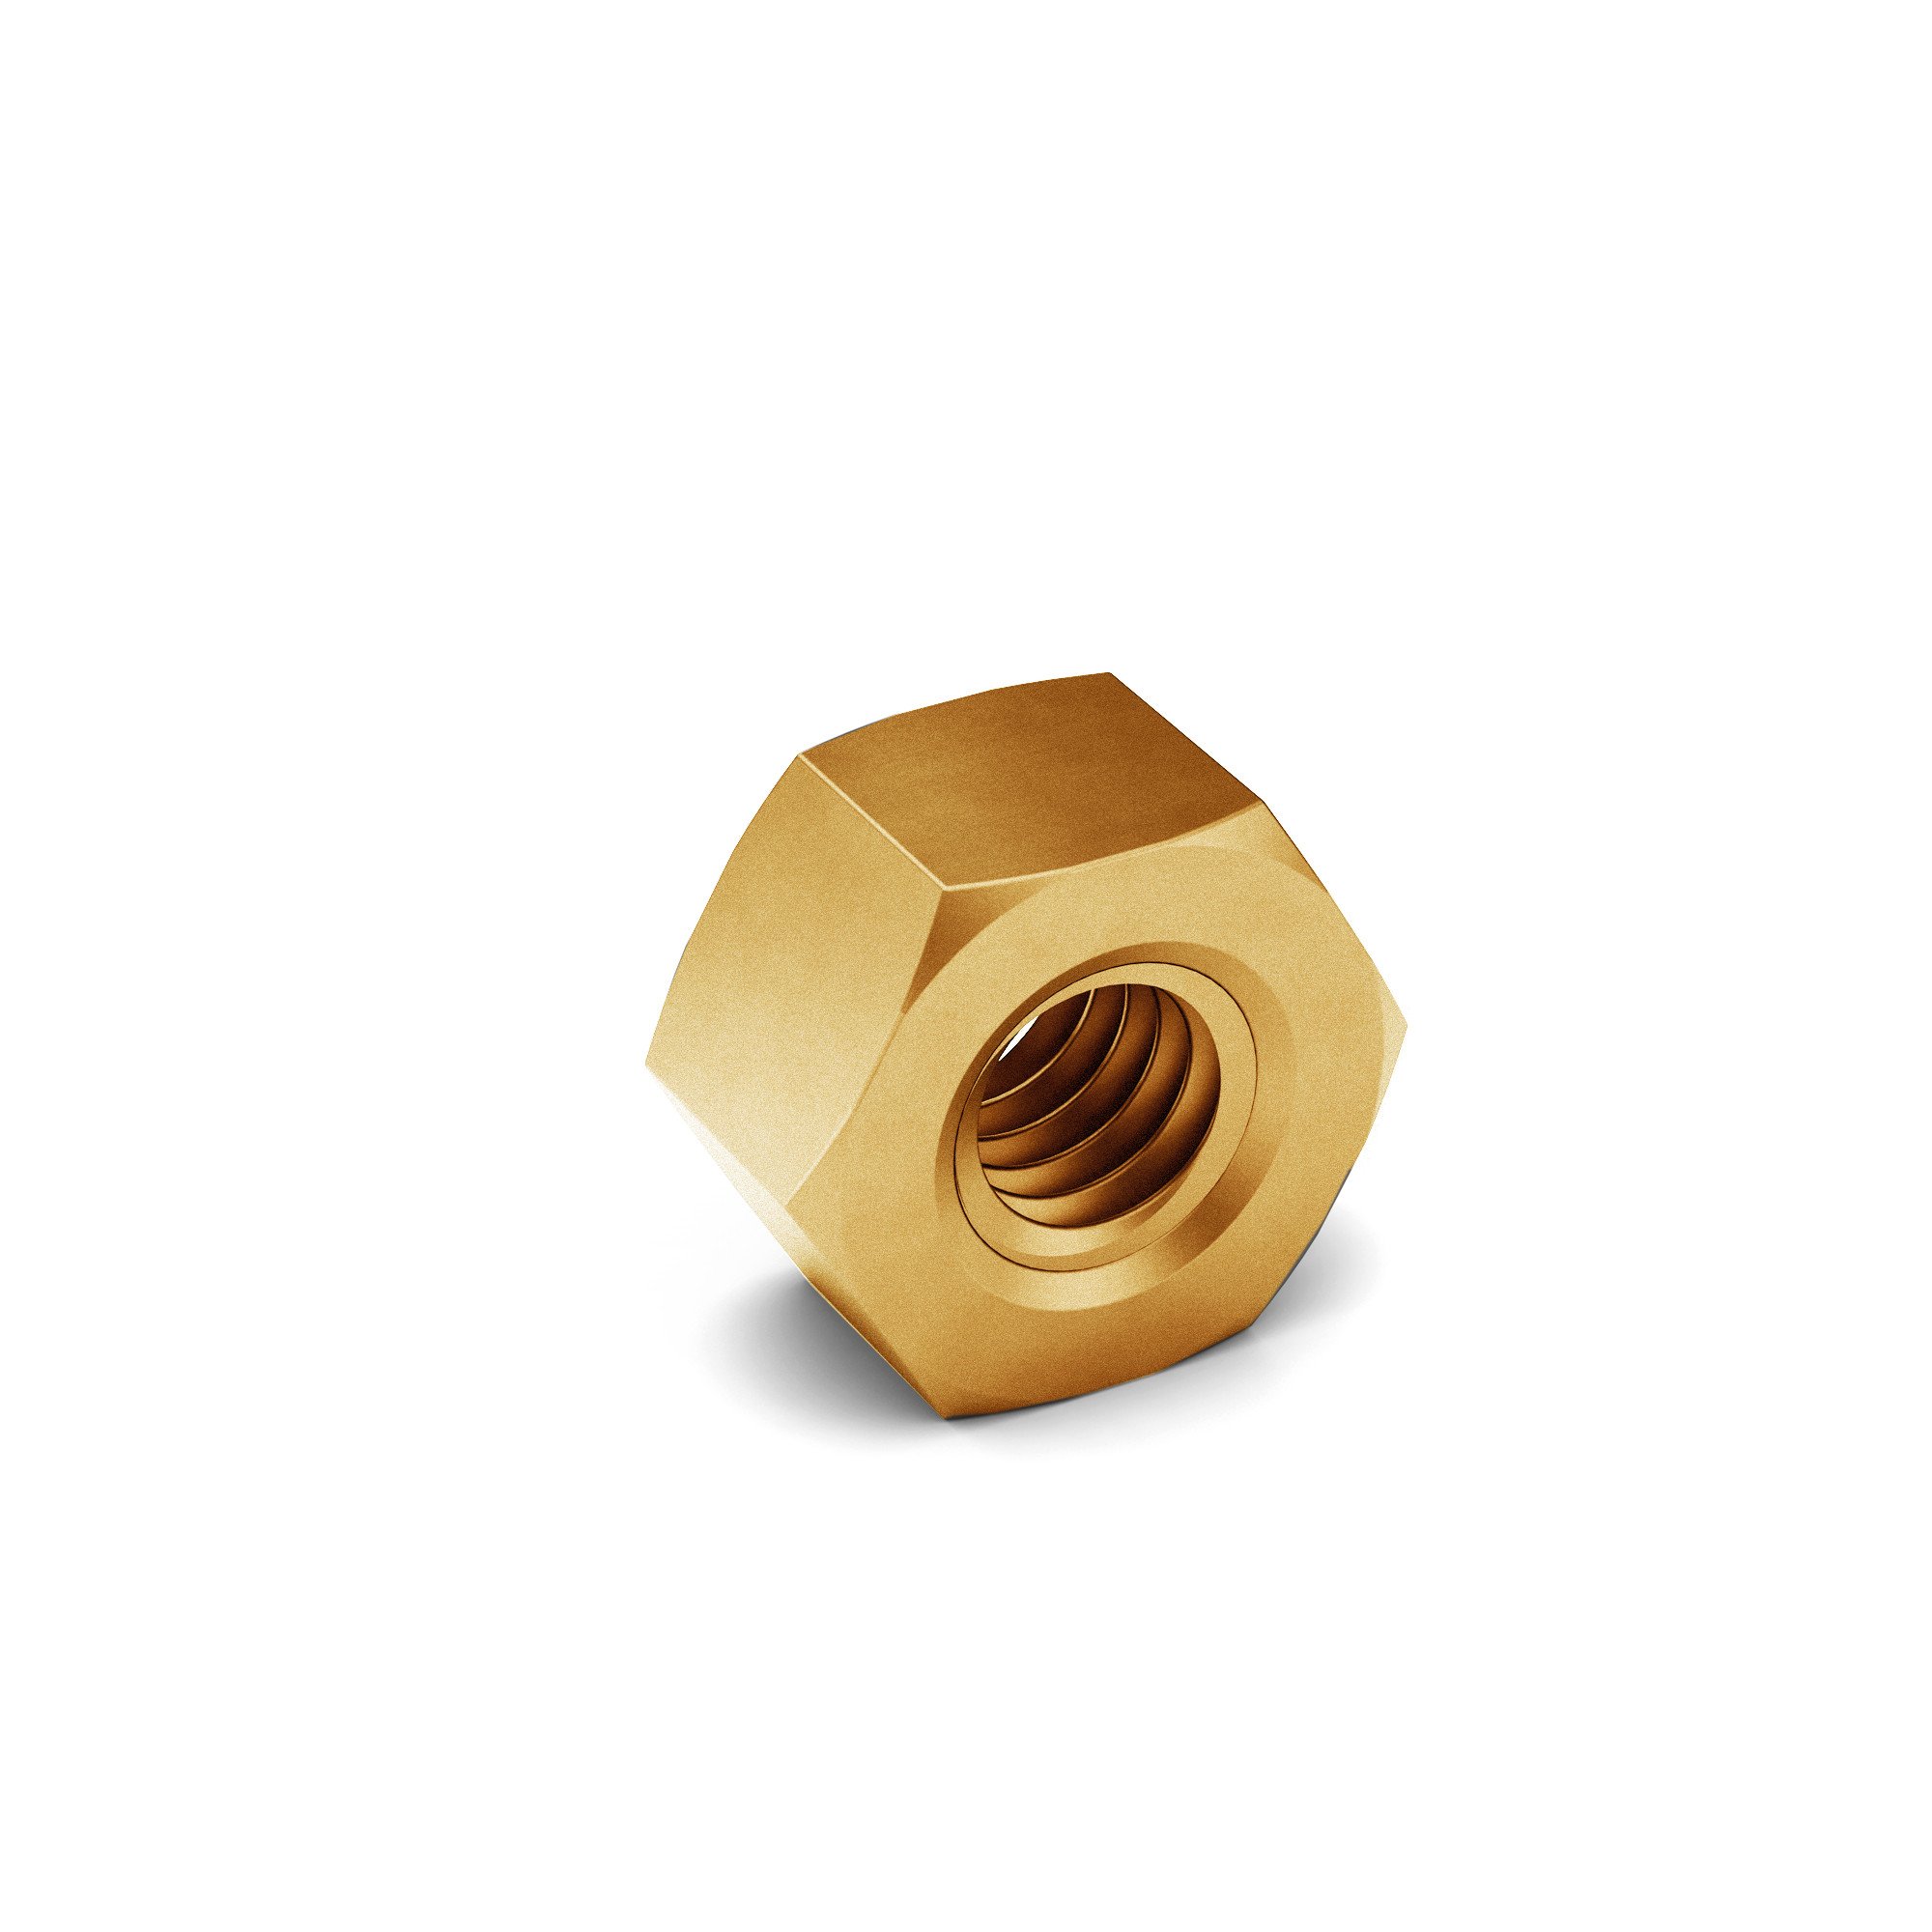 3/8-24 J995 GR 8 Hex Nut Zinc Yellow Made in USA